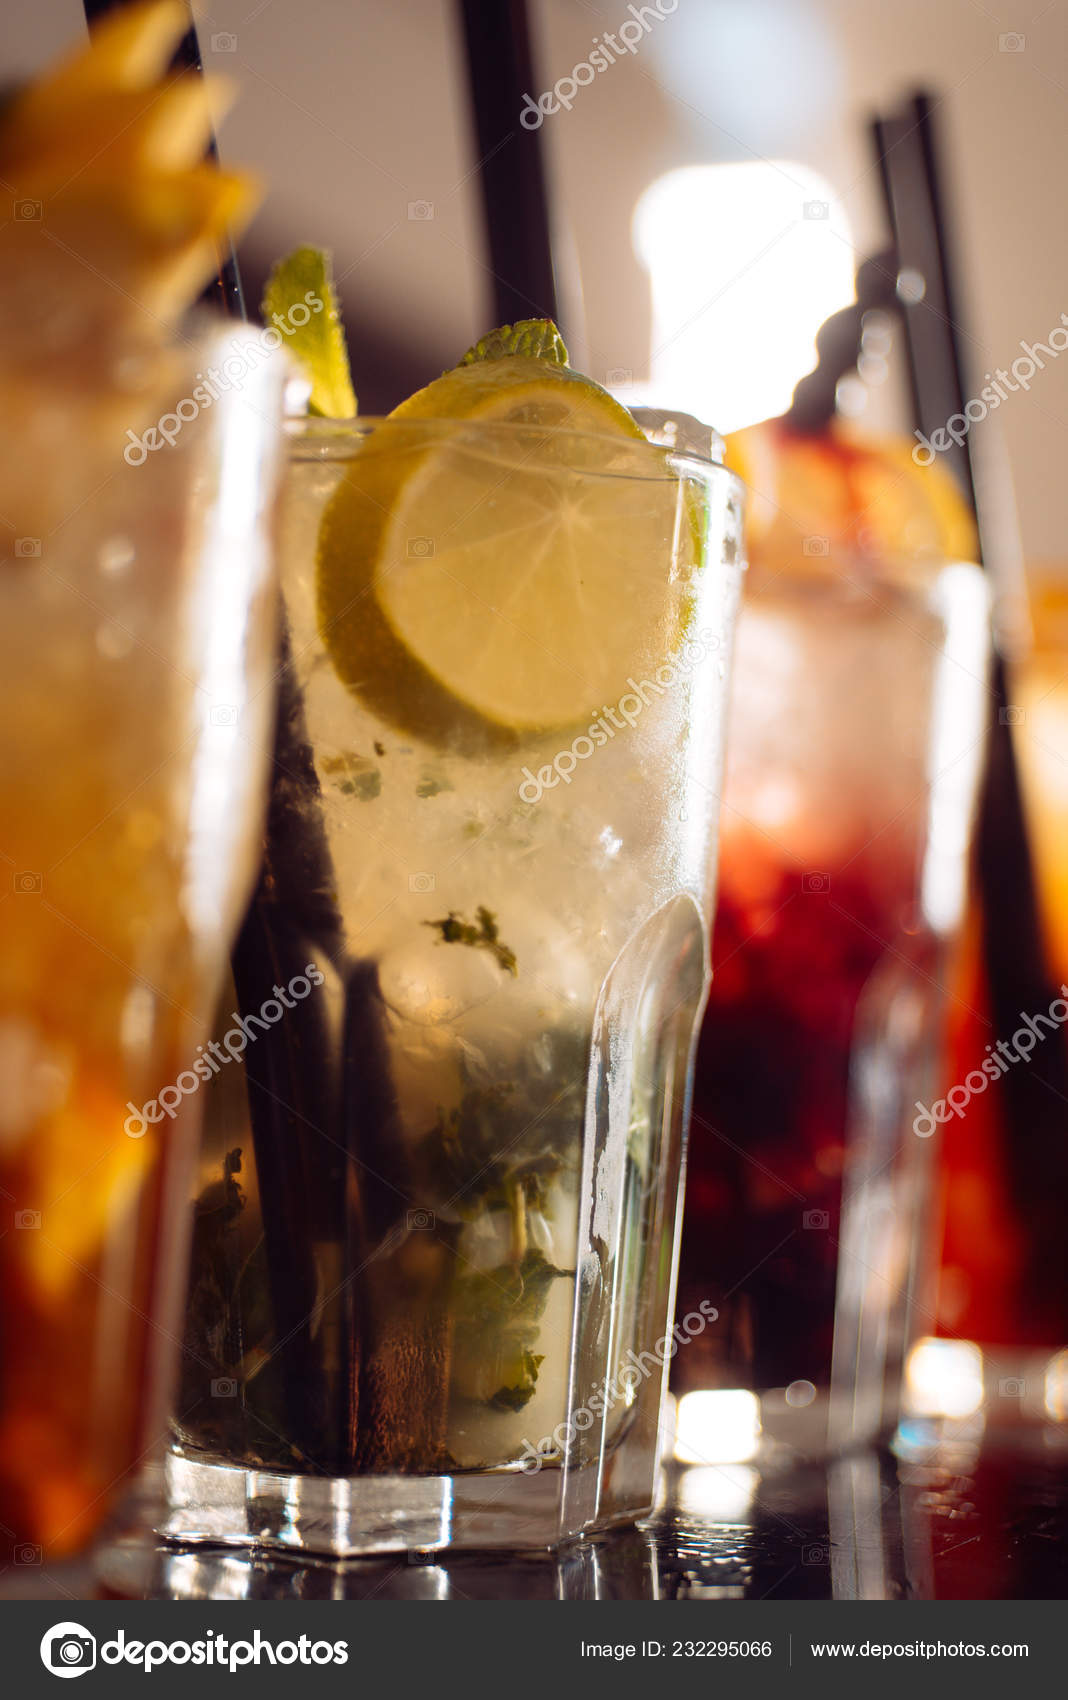 Afterwork drinks. Alcoholic mixed drinks with ice. Juicy beverages